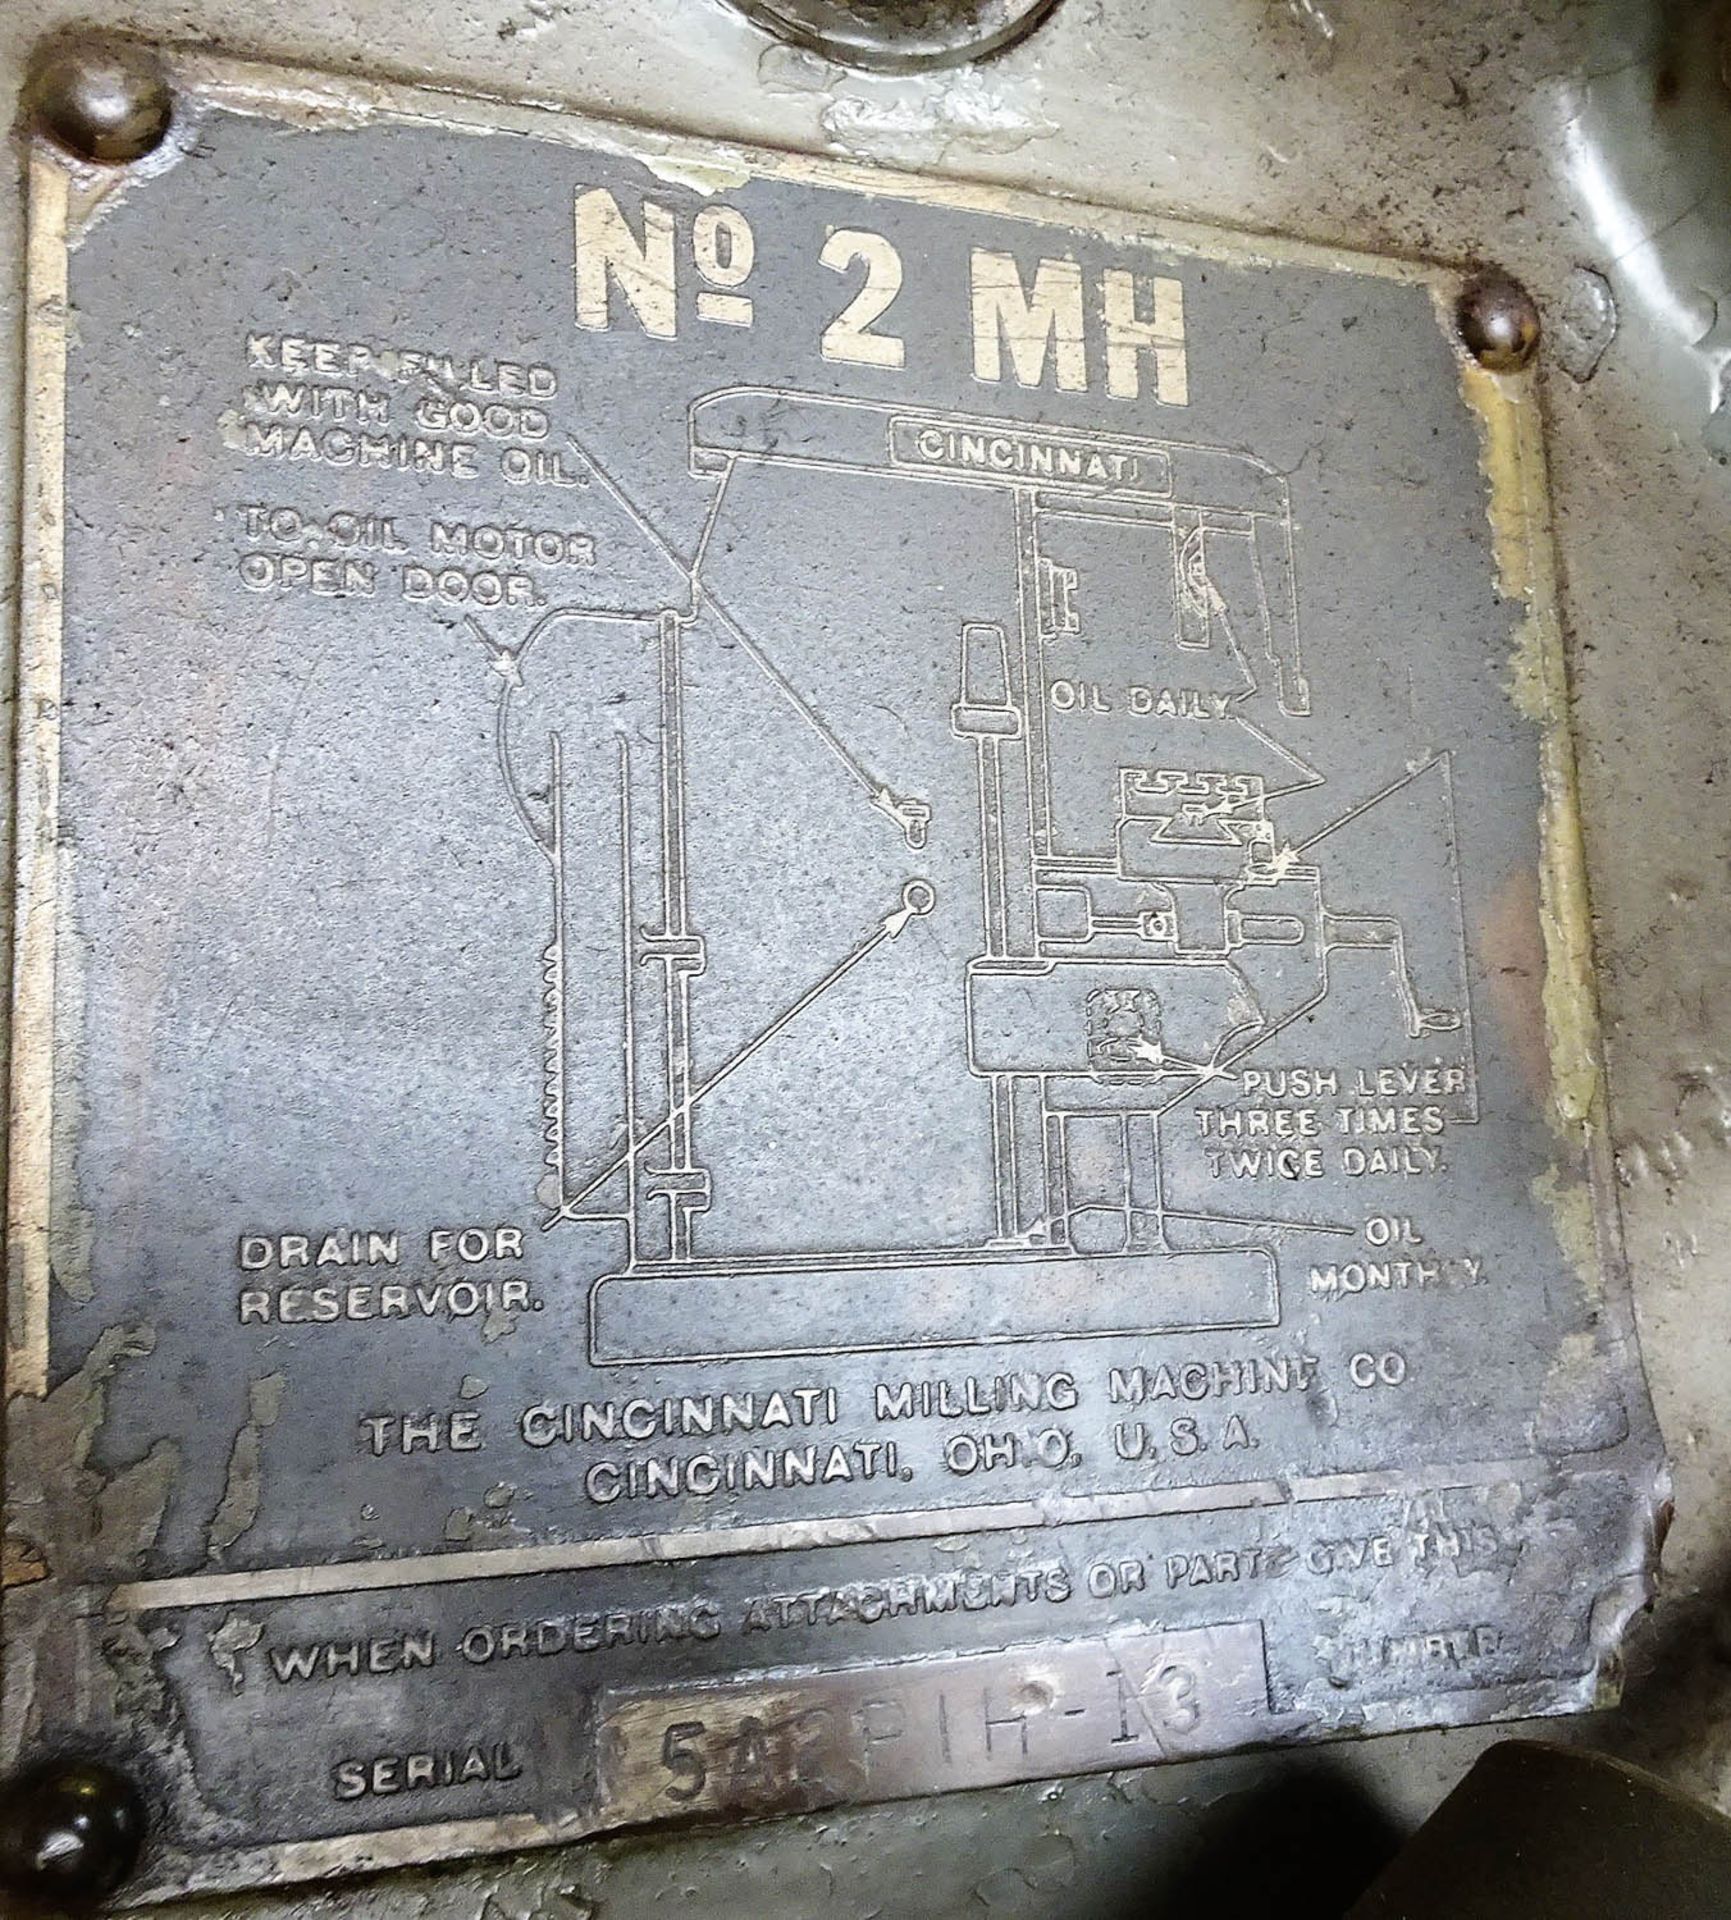 CINCINNATI MDL. NO. 2MH VERTICAL MILLING MACHINE, WITH ROTARY TABLE, VARIABLE SPEED, S/N 5A2P1H-13 - Image 4 of 4